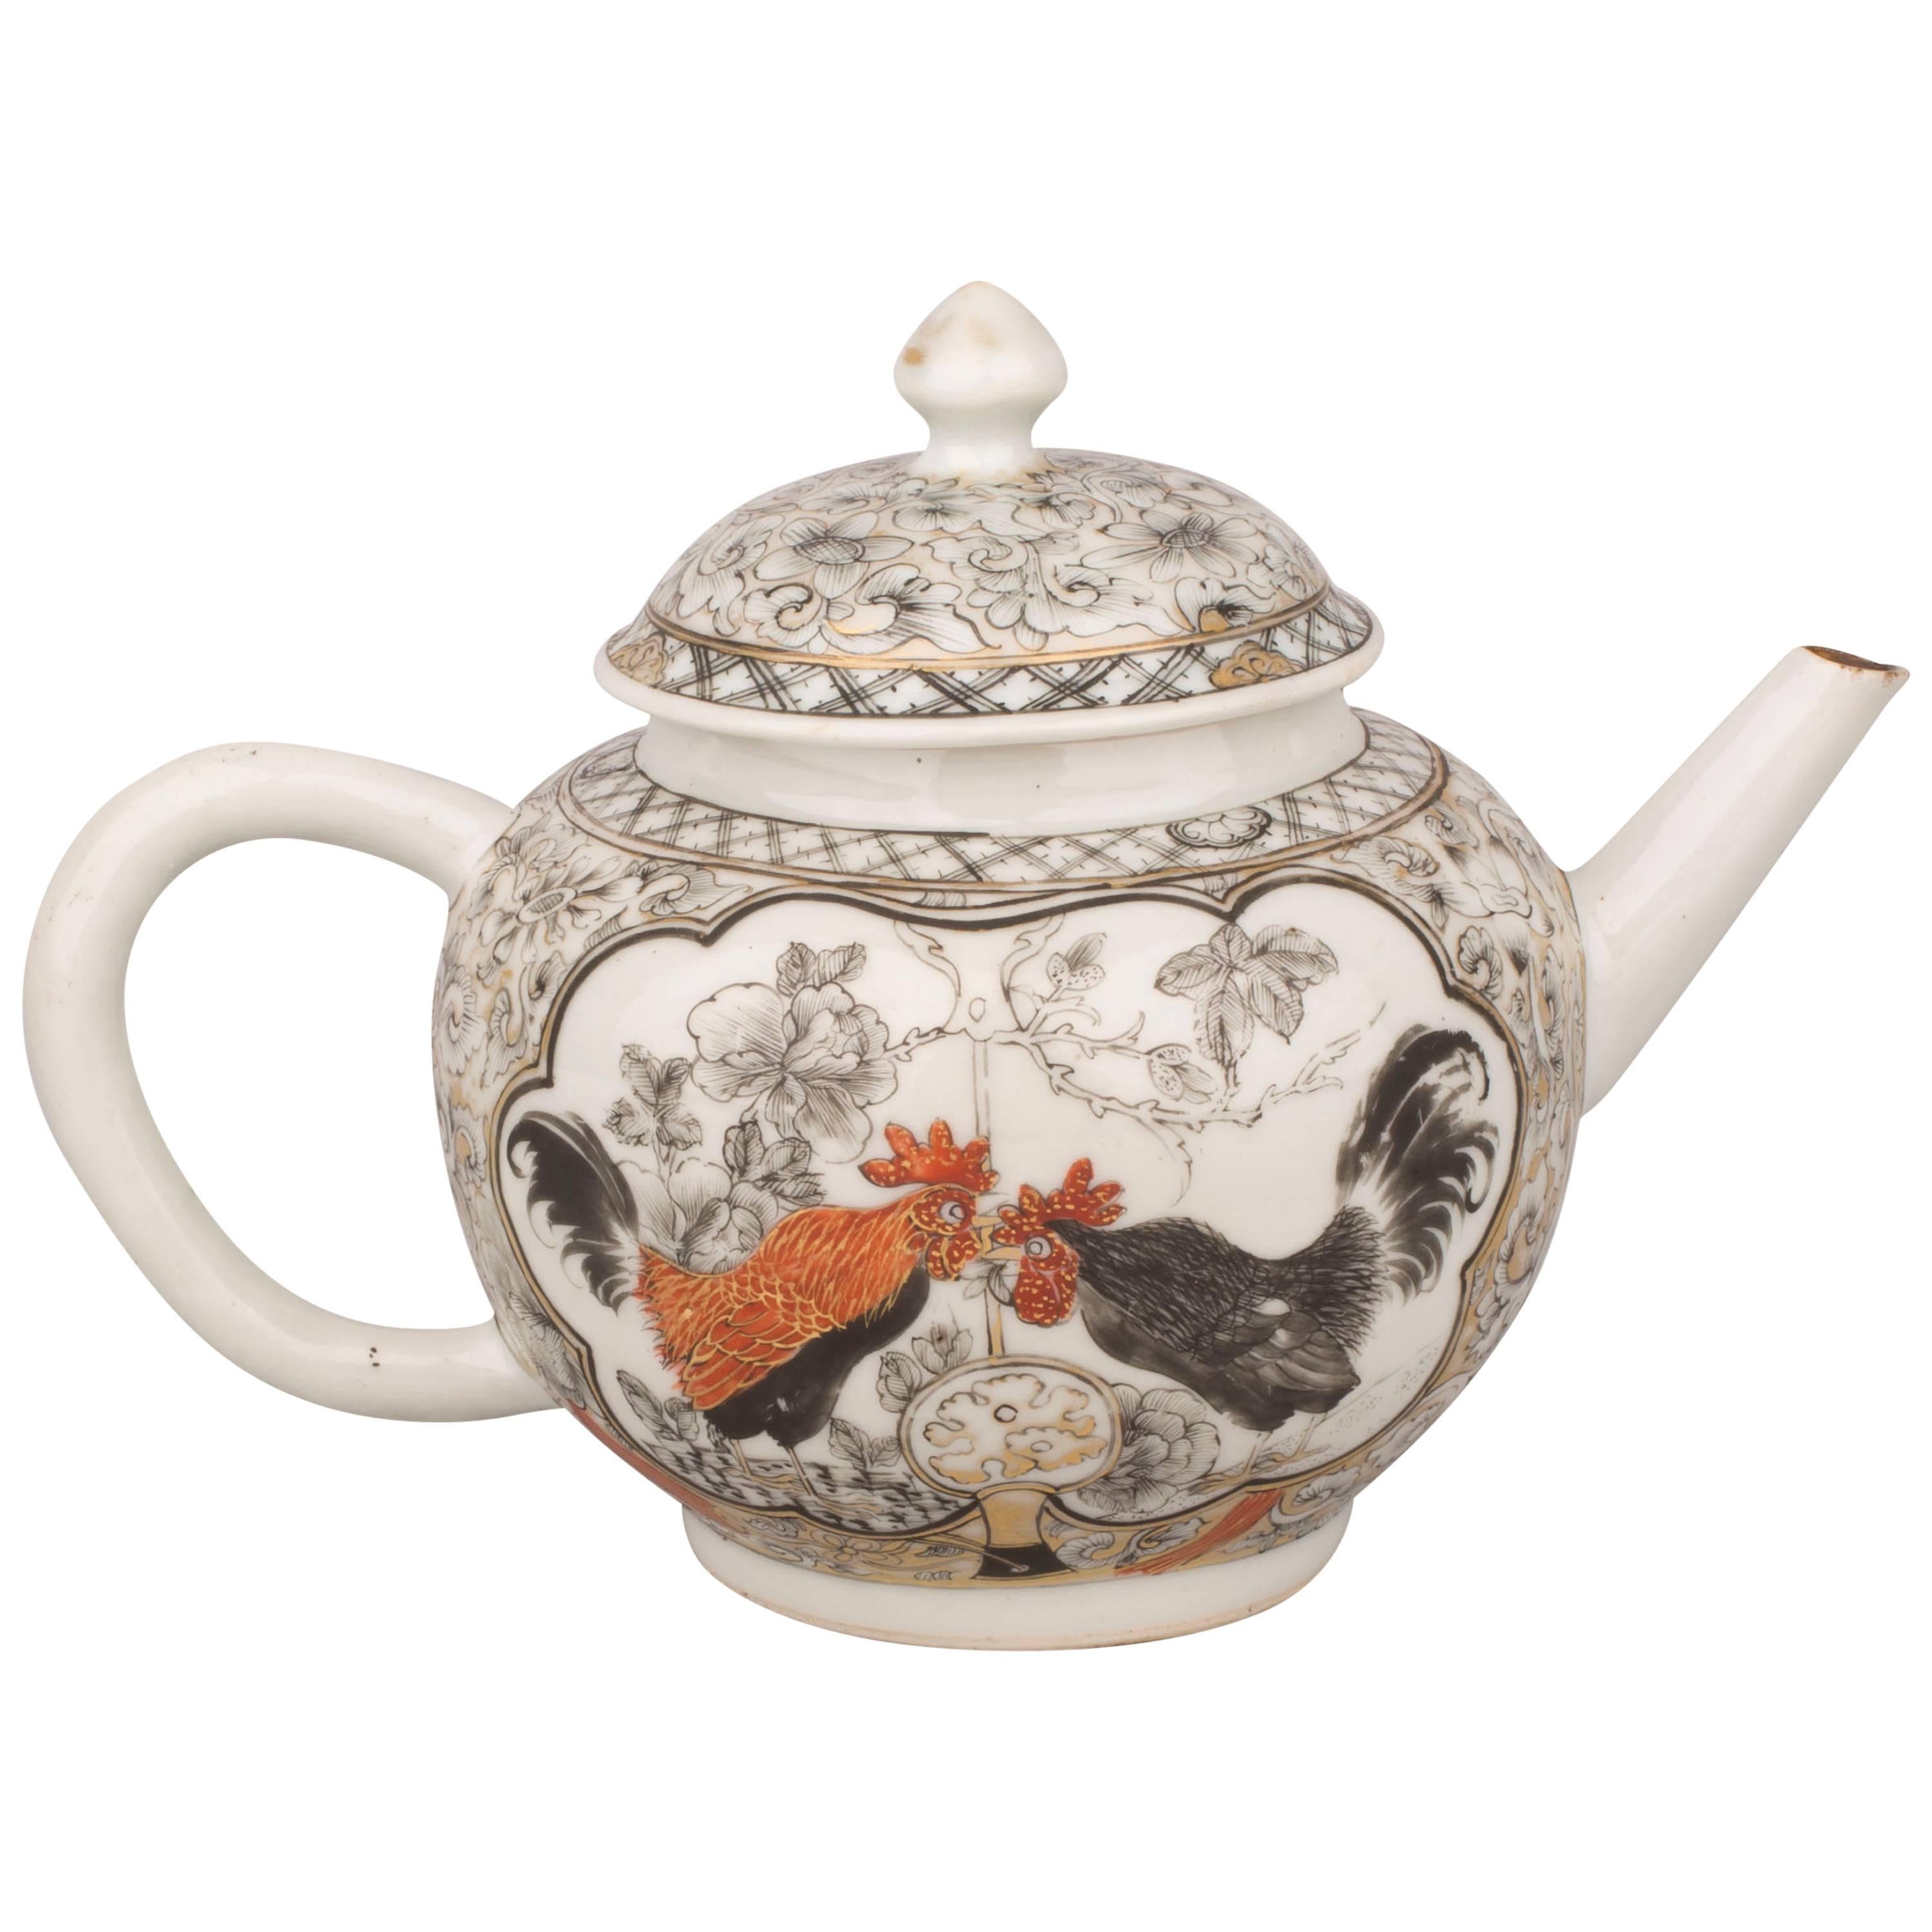 Chinese Export Porcelain Grisaille and Gilt Teapot with Chickens, 18th Century